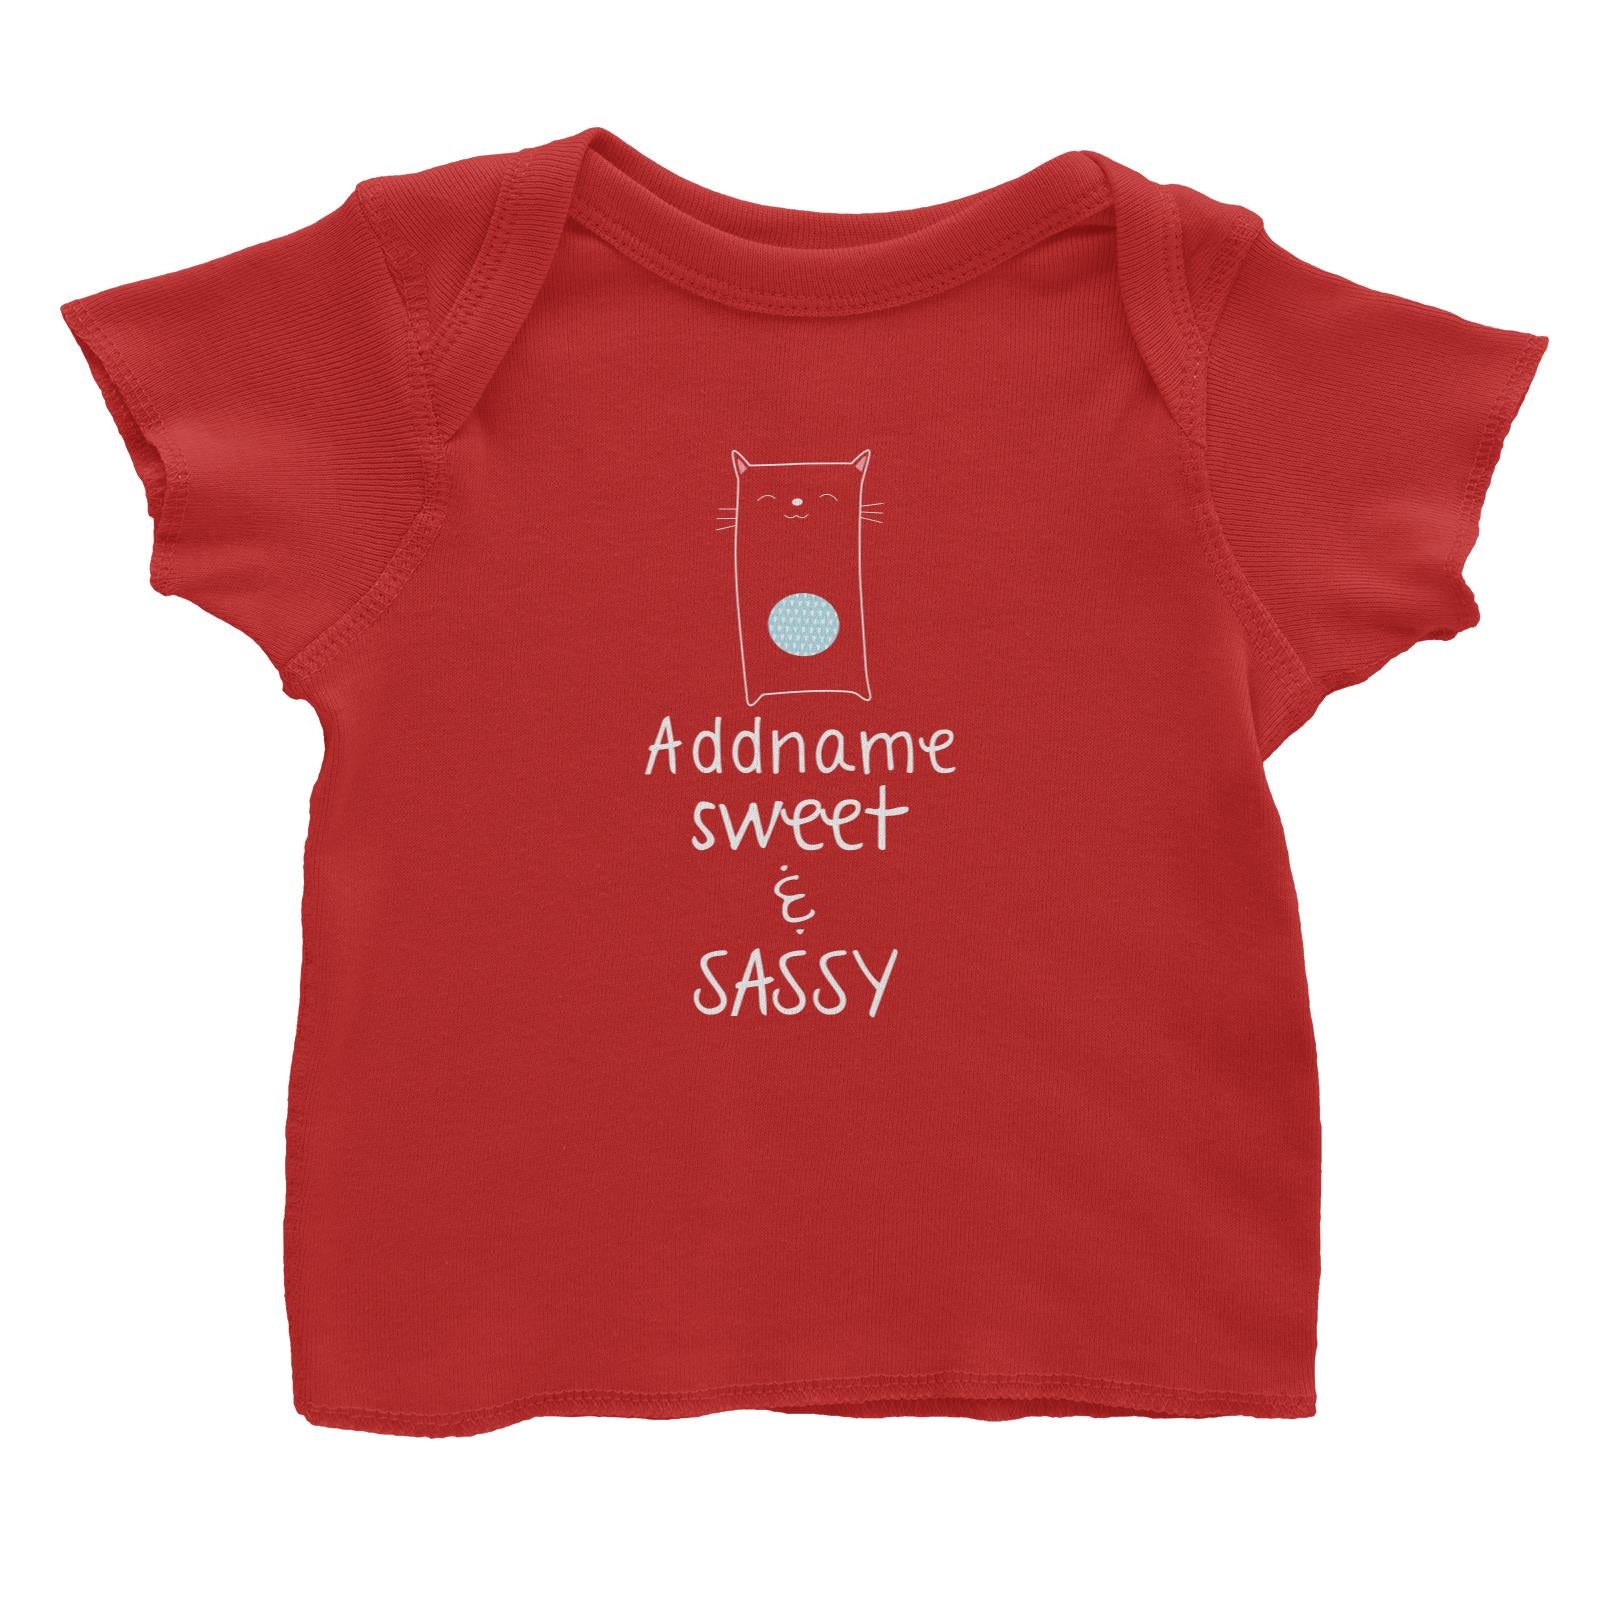 Cute Animals and Friends Series 2 Cat Addname Sweet & Sassy Baby T-Shirt